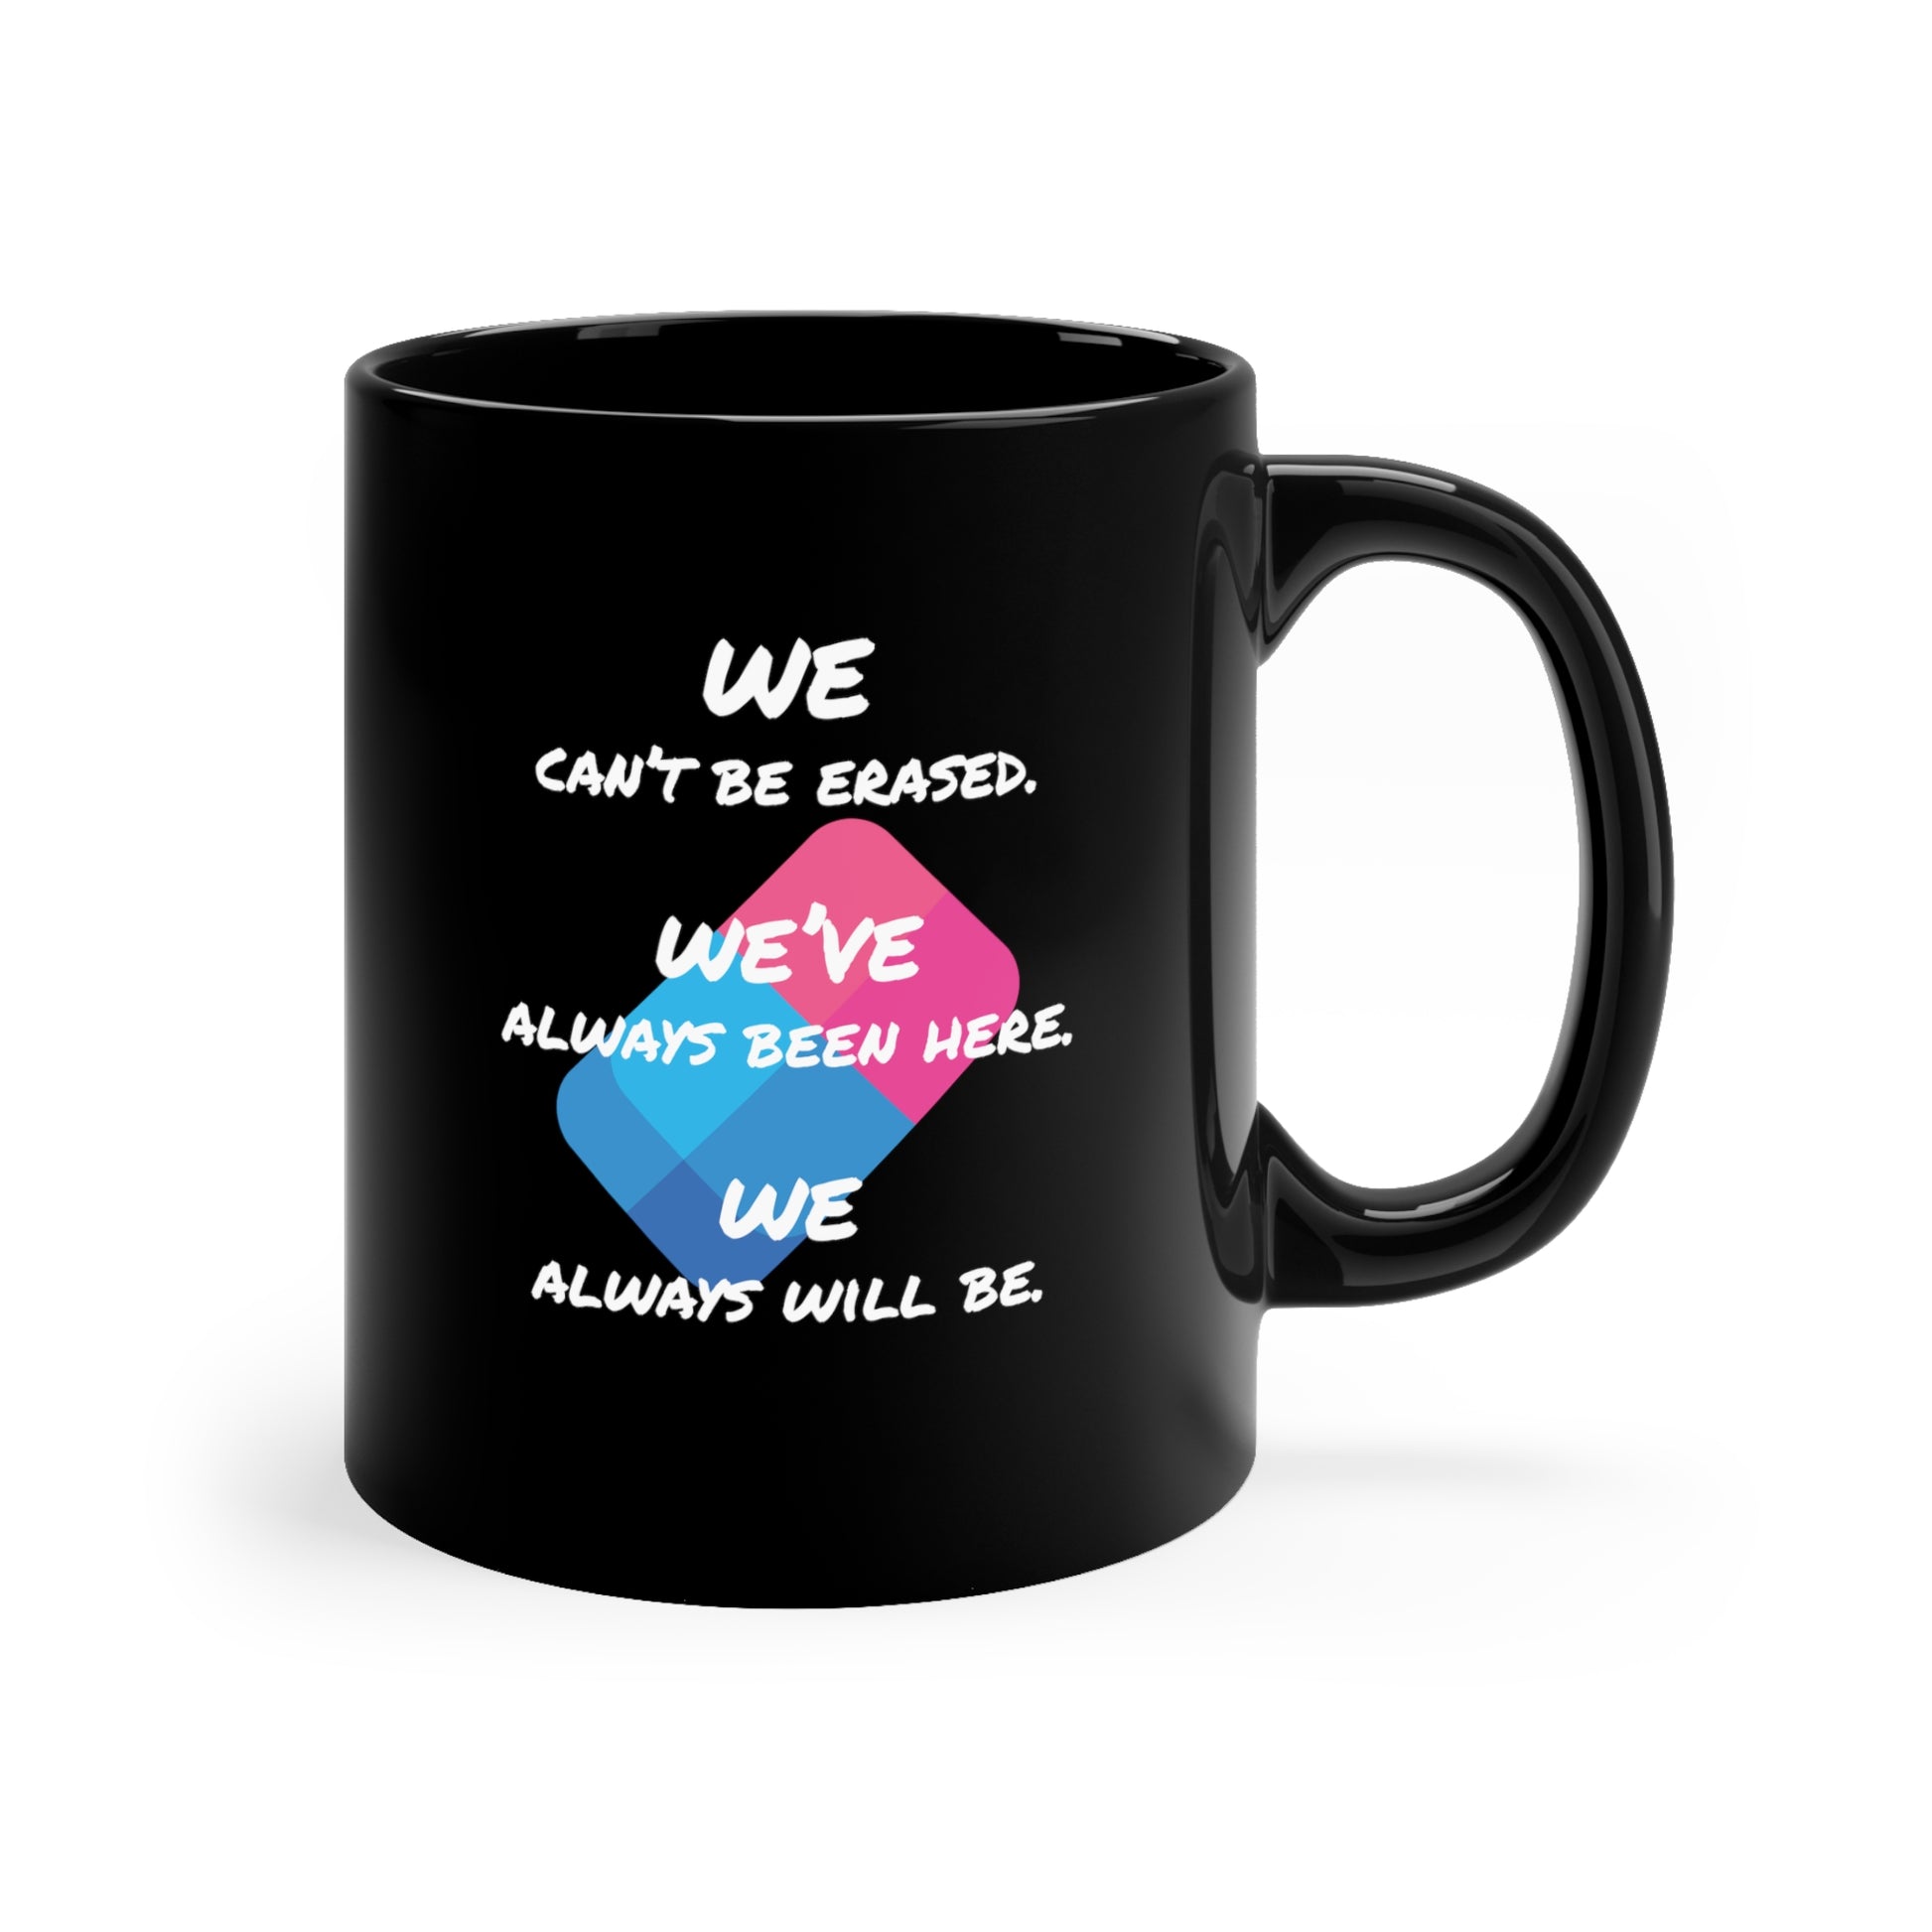 We Can't Be Erased, We've Always Been Here, We Always Will Be 11oz Black Mug - Queer We Are Shop